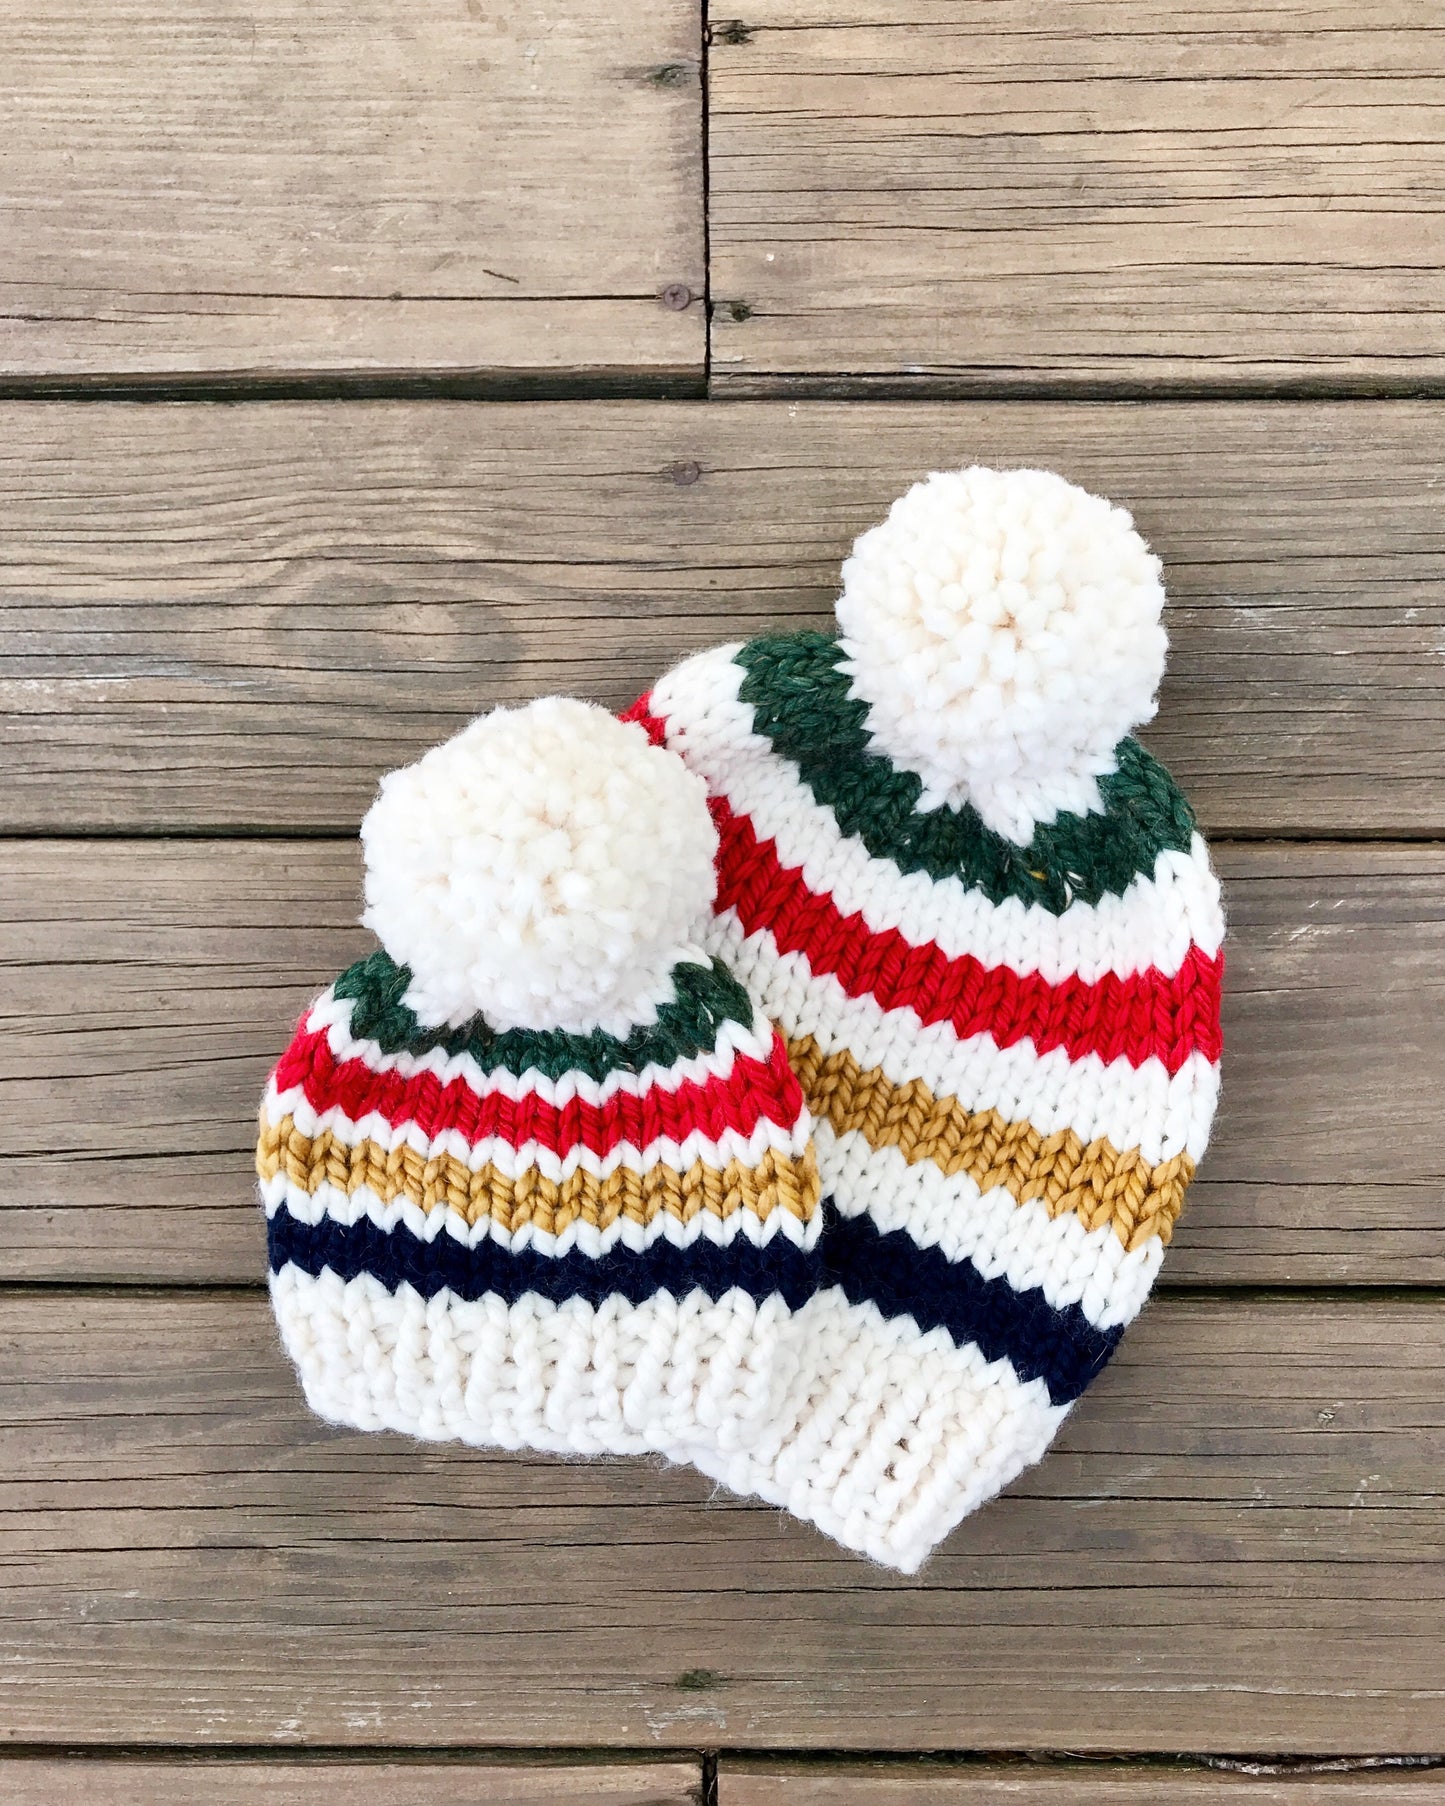 Mommy and Me Hats Knit Baby and Adult Beanie Handmade YARN Pom Pom // Hudson Bay Stripes